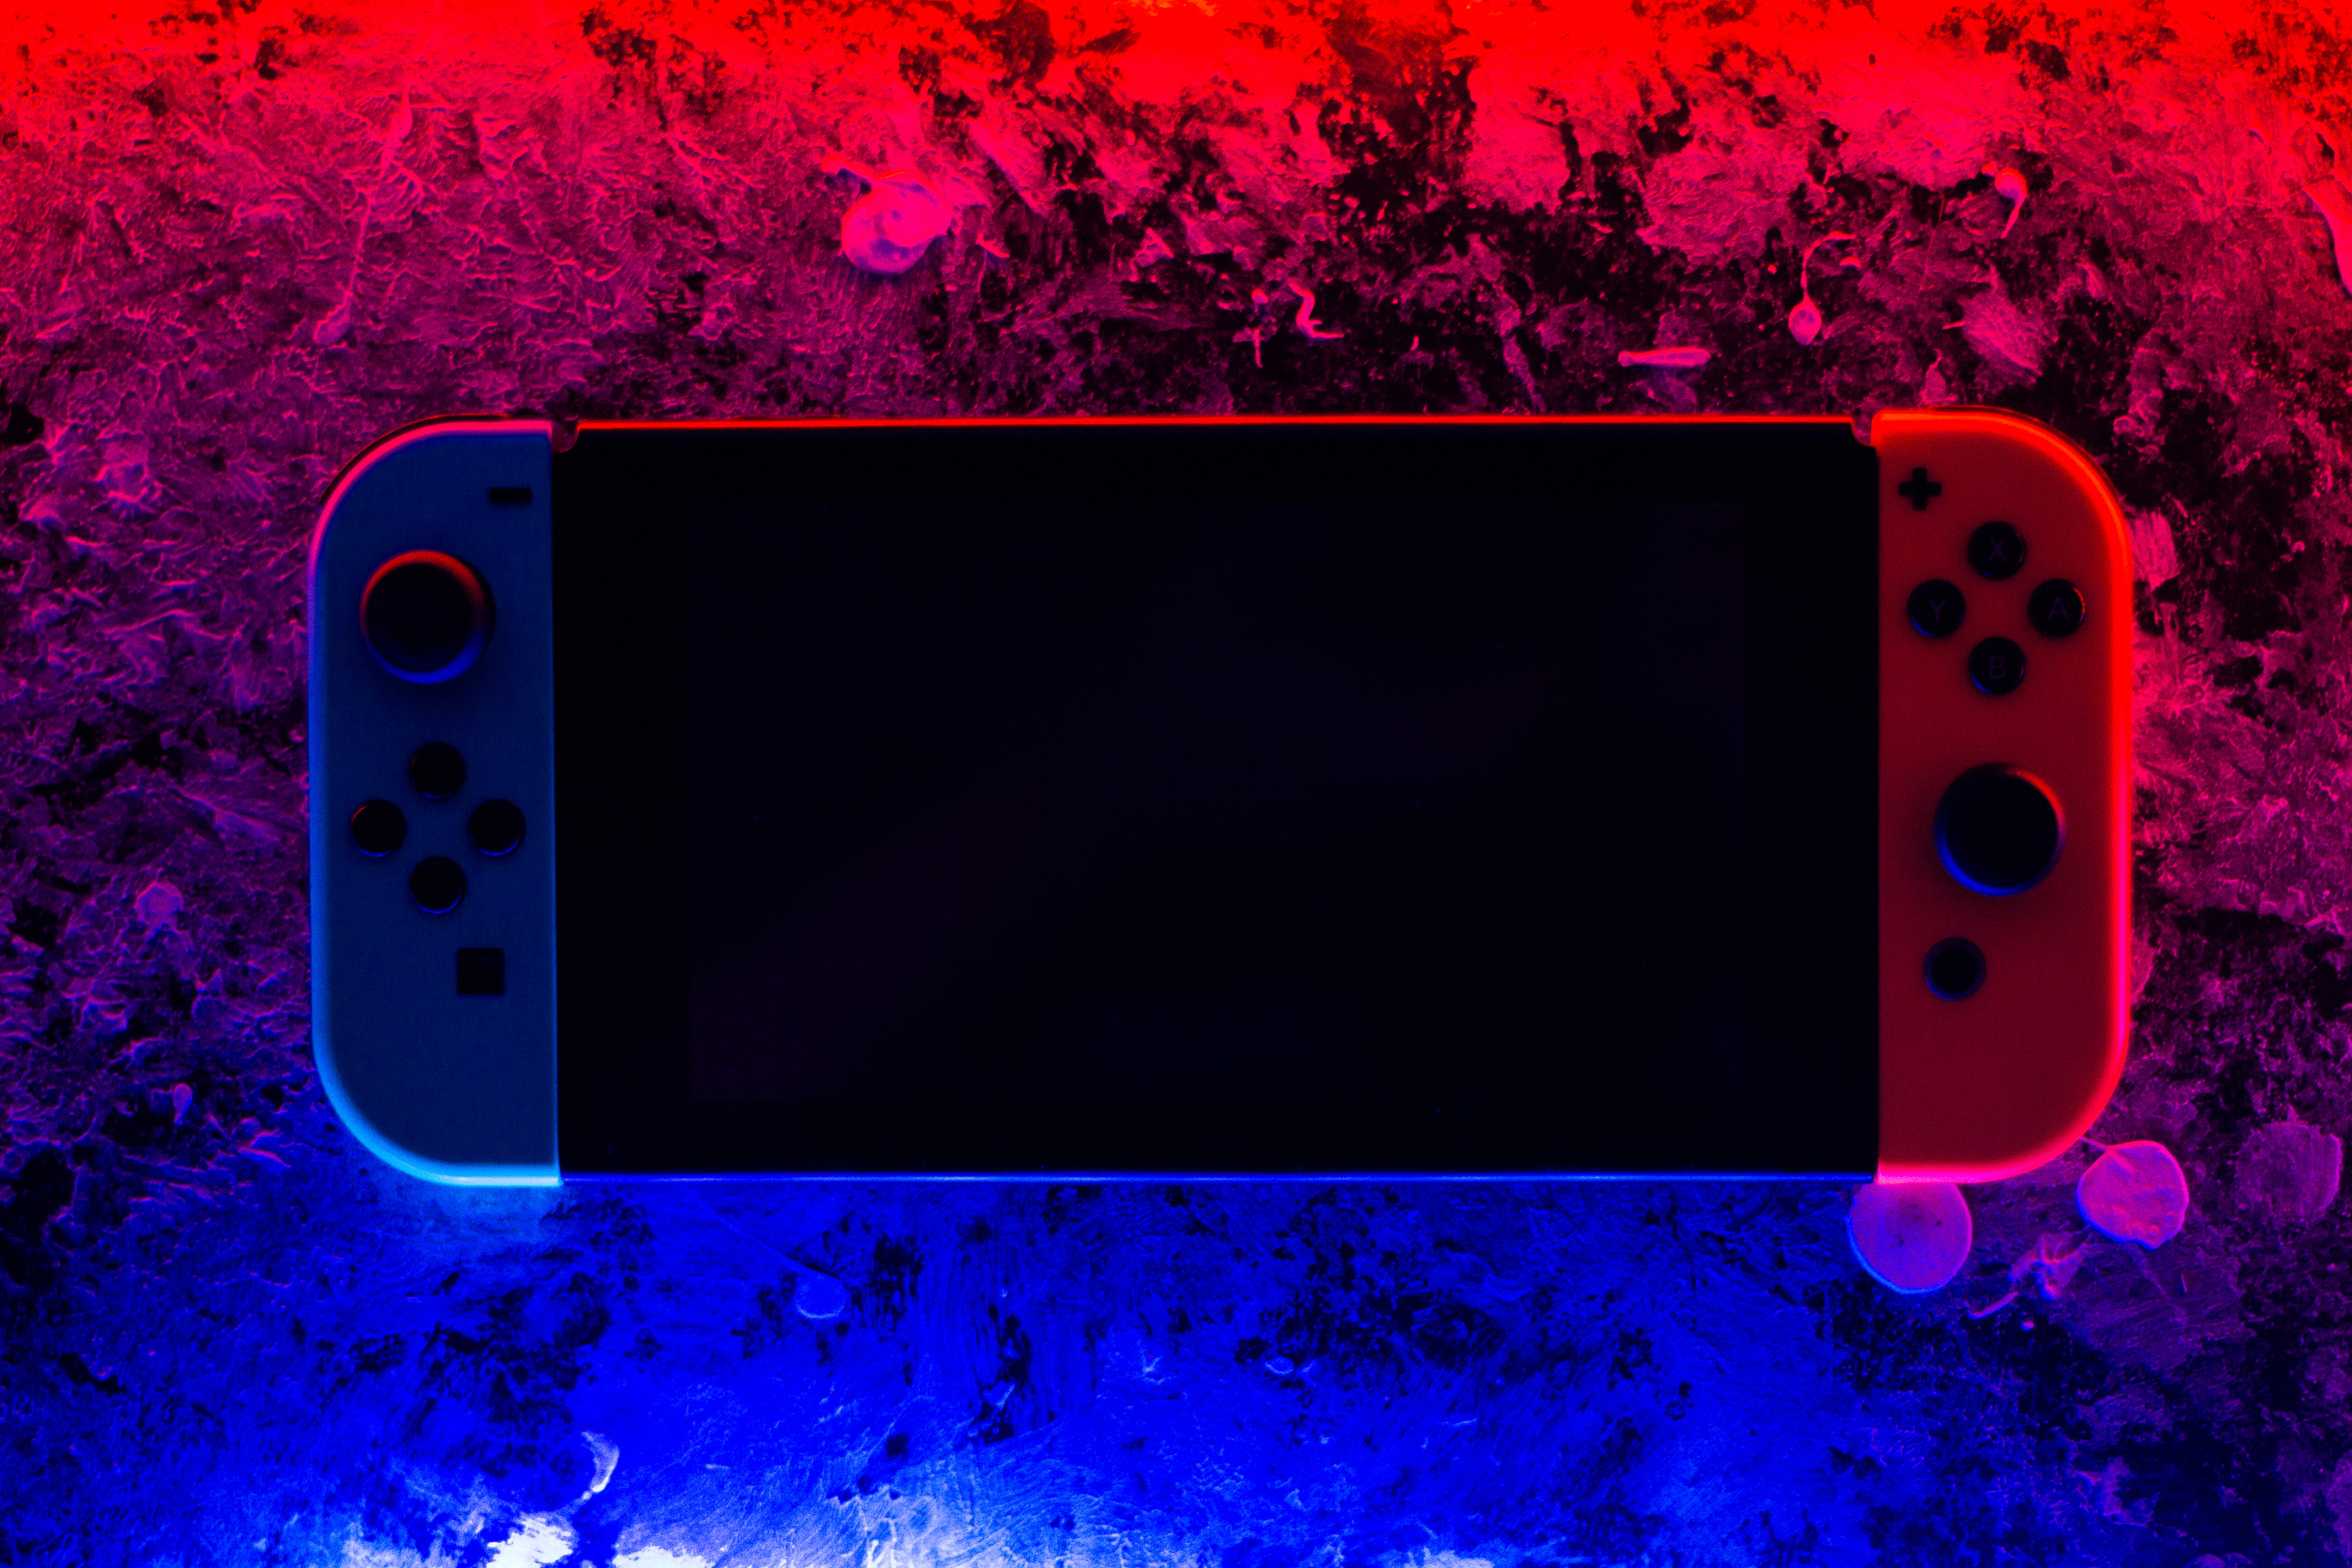 Game Console on a Red and Blue Background